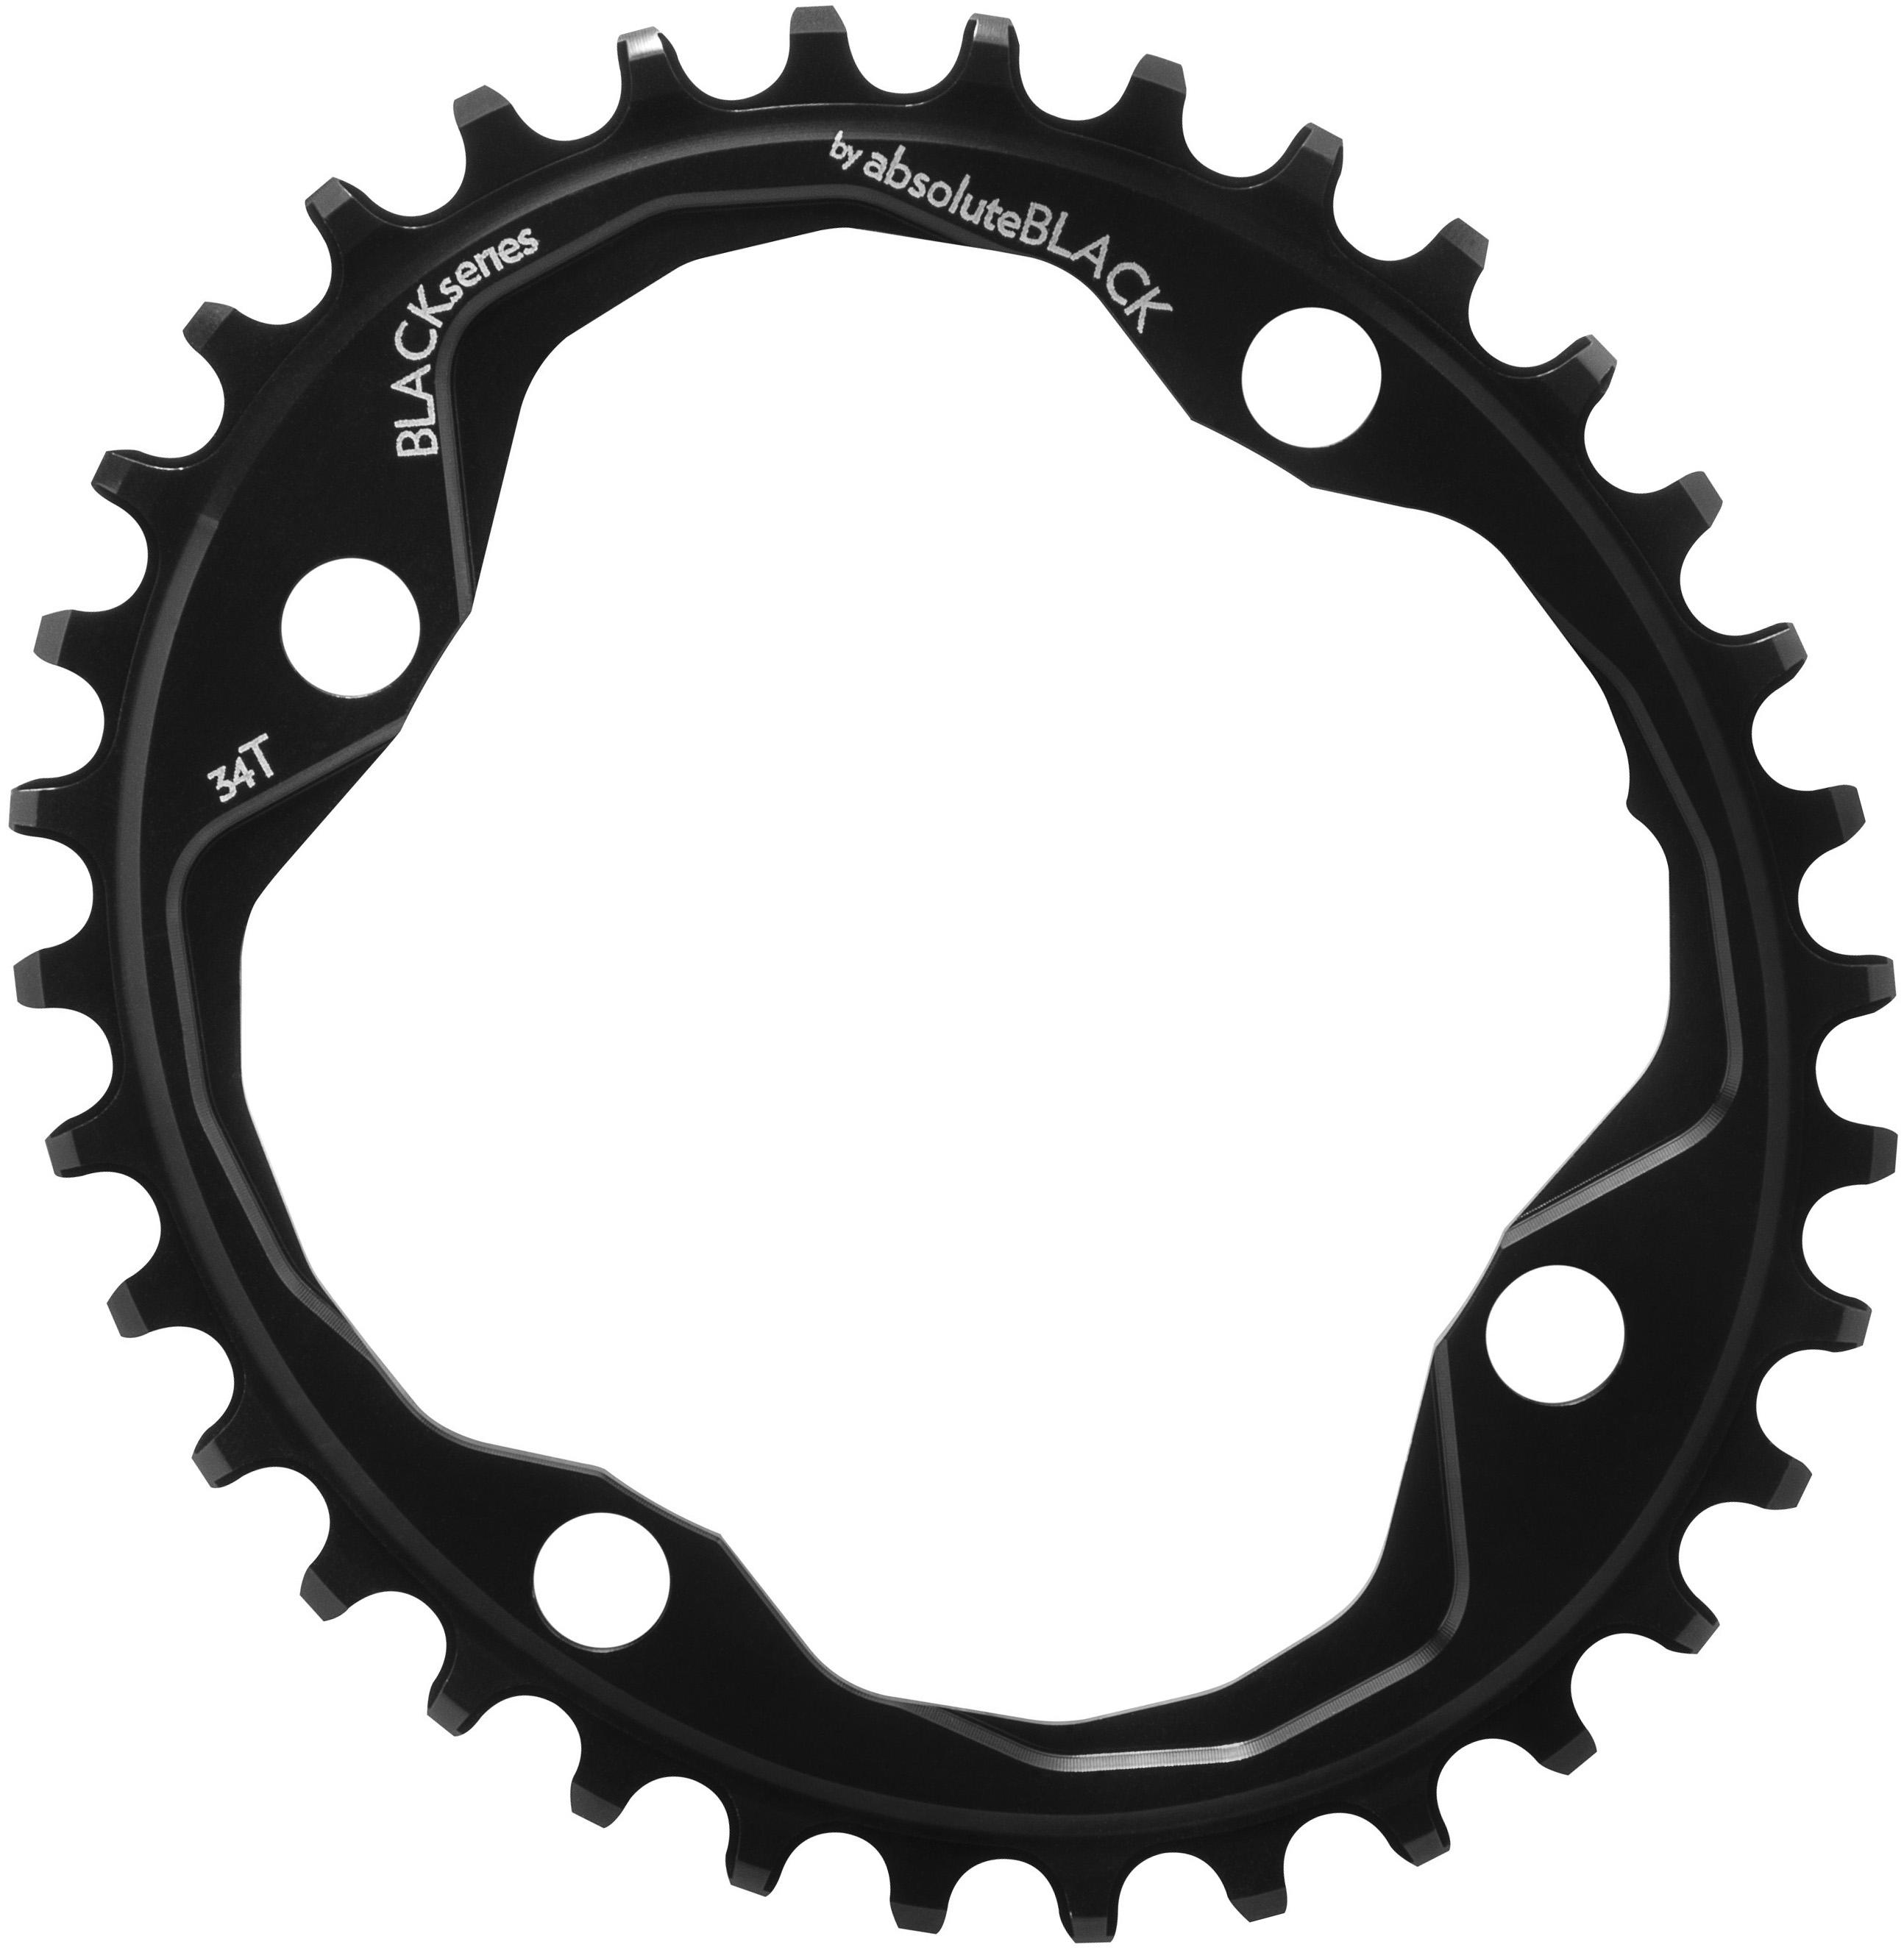 BLACK by Absoluteblack Narrow Wide Oval MTB Single Chainring | chain ring